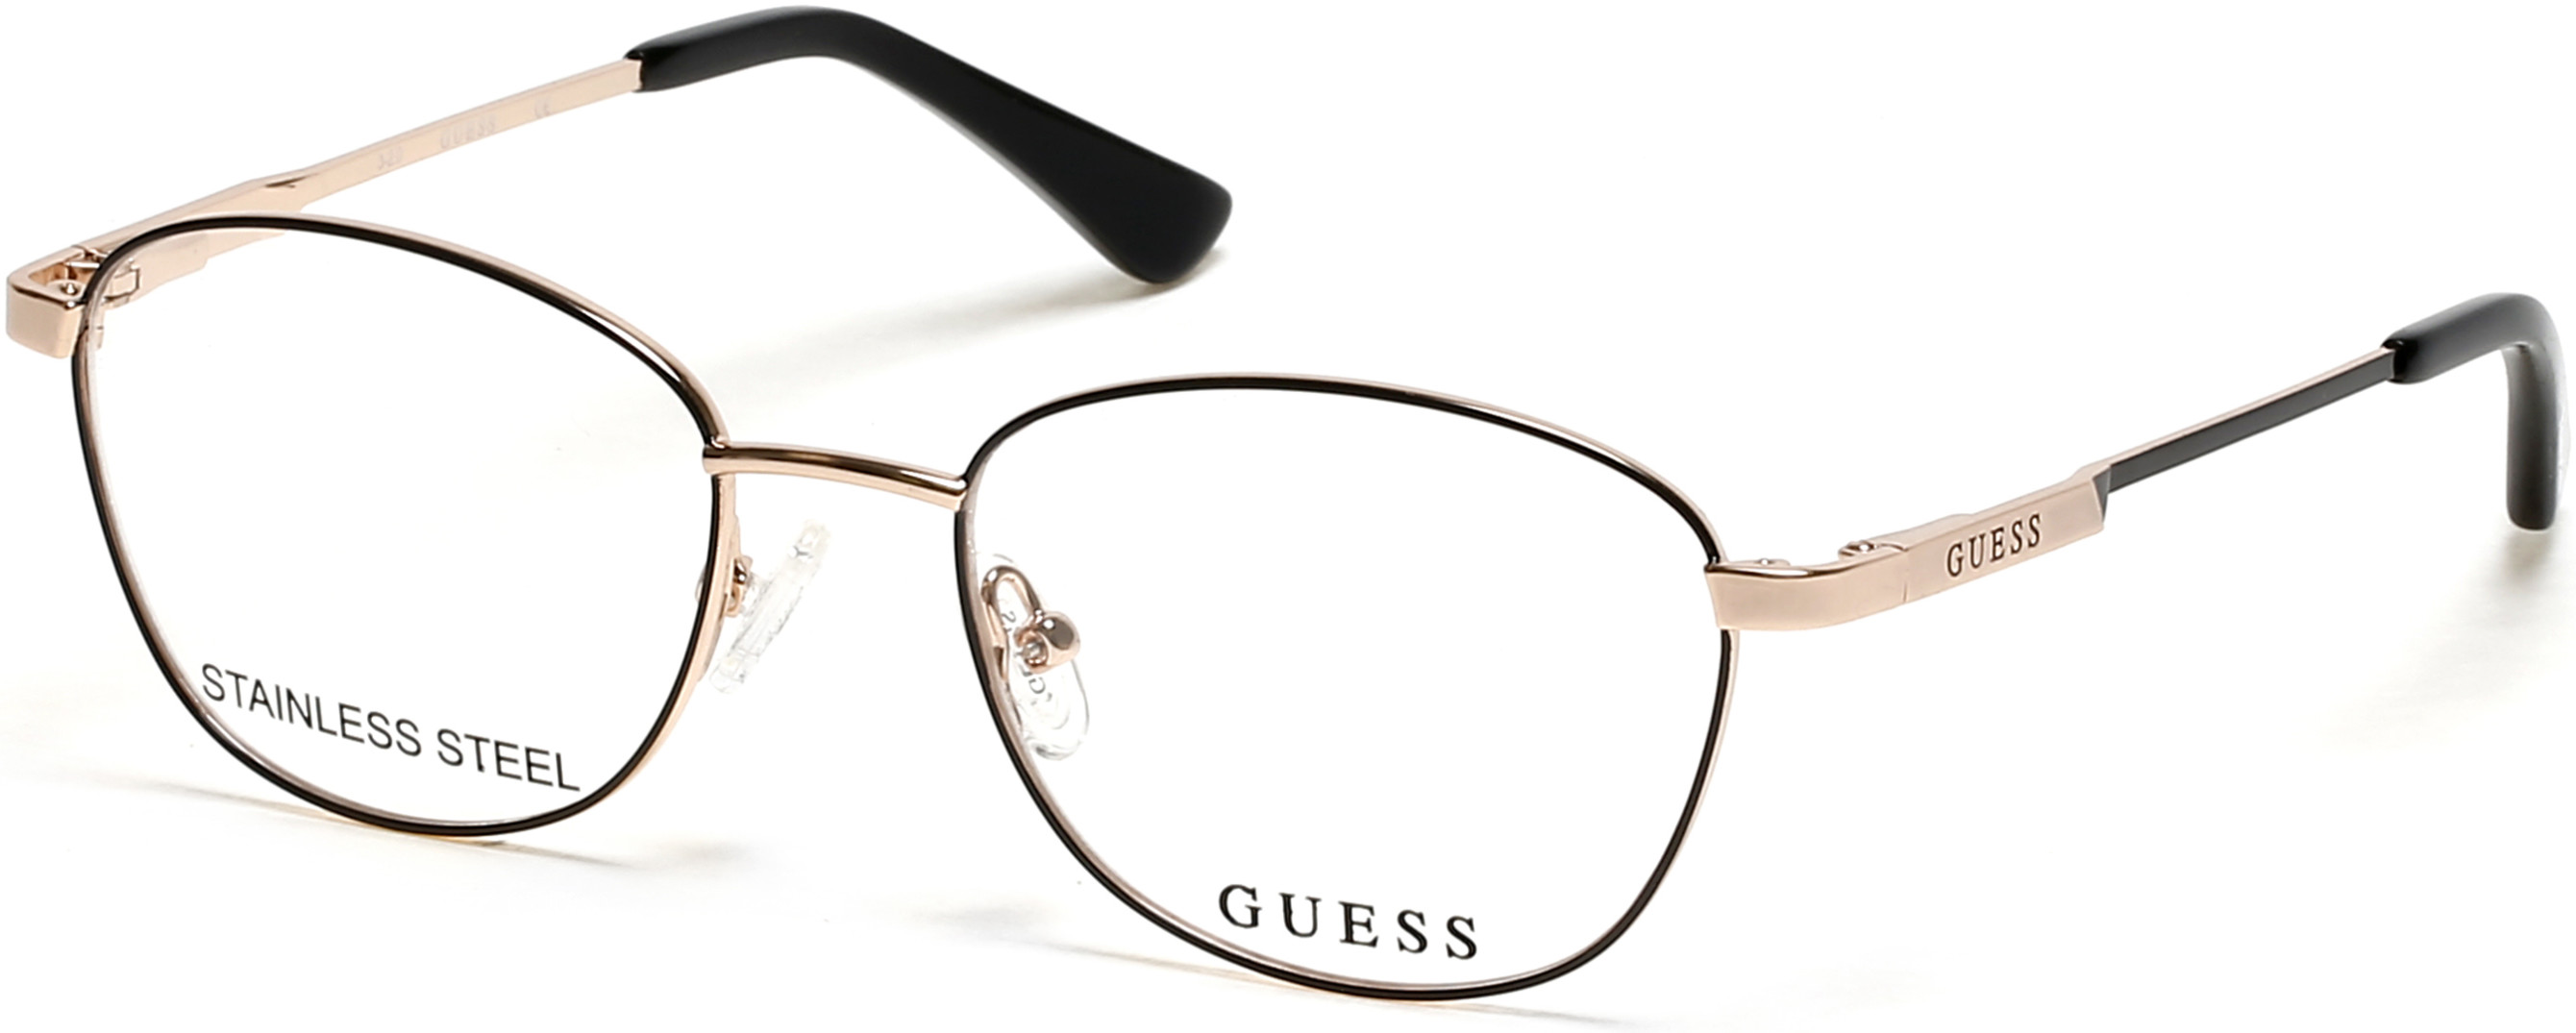 GUESS 9204